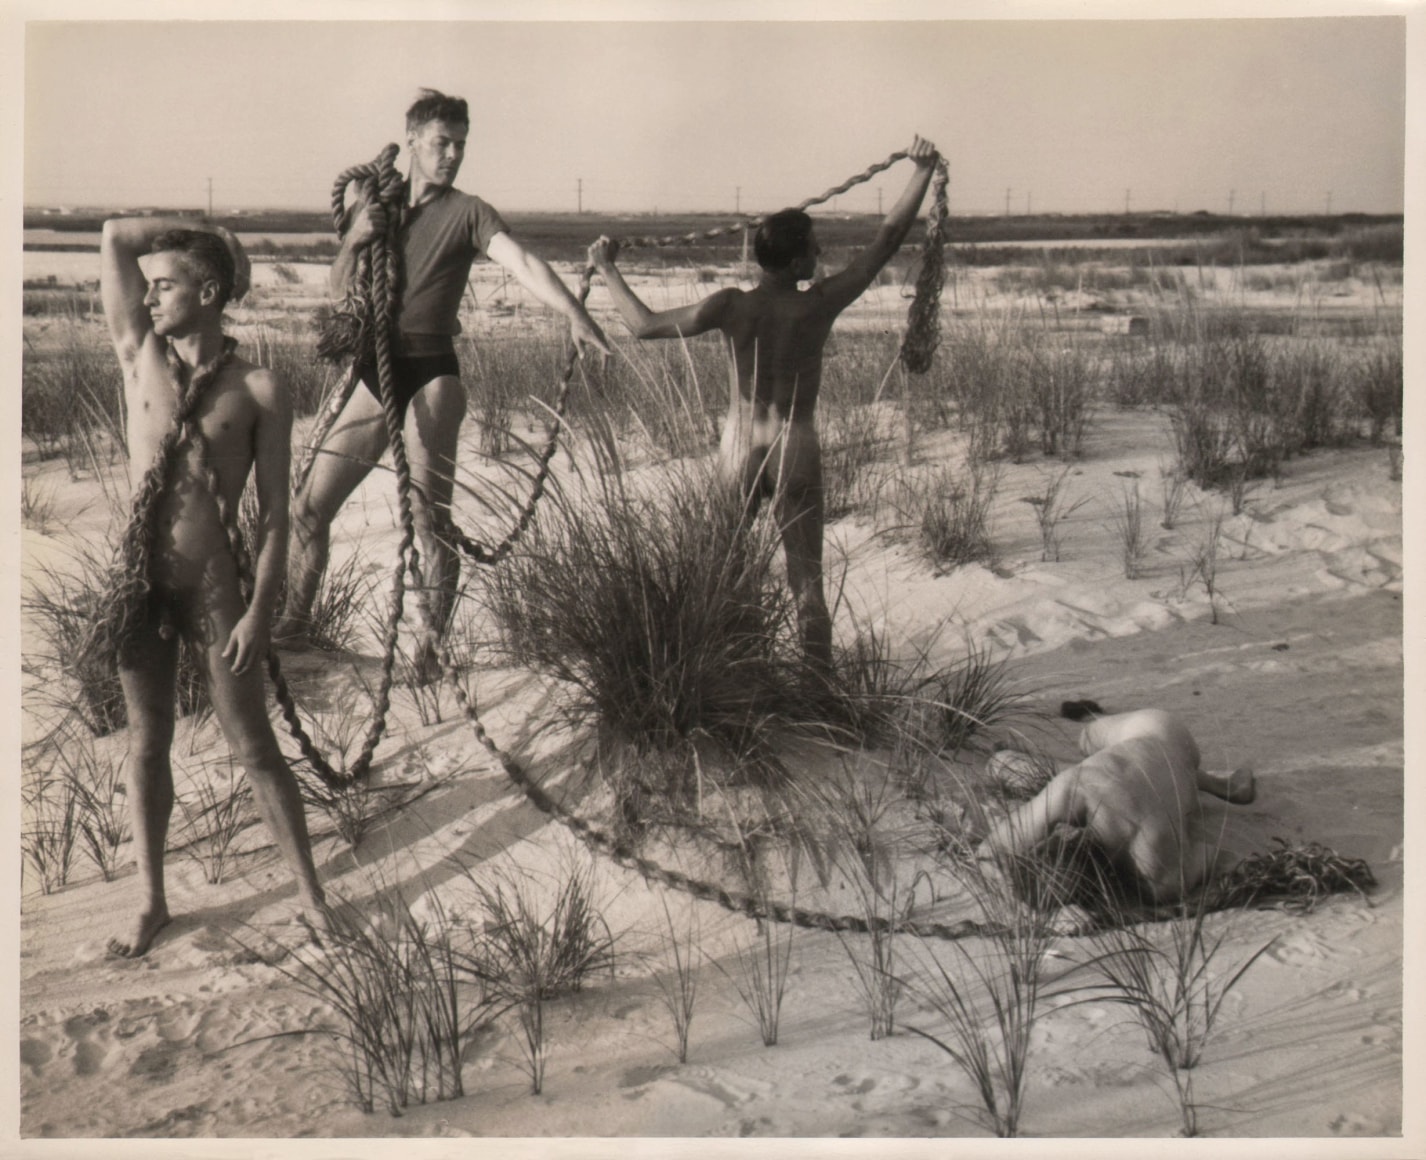 PaJaMa, Glenway Wescott, George Platt Lynes, Paul Cadmus, [unidentified], ​c. 1941. Four men on the beach with a thick rope connecting them. Three are standing (left), one lays facedown in the sand.